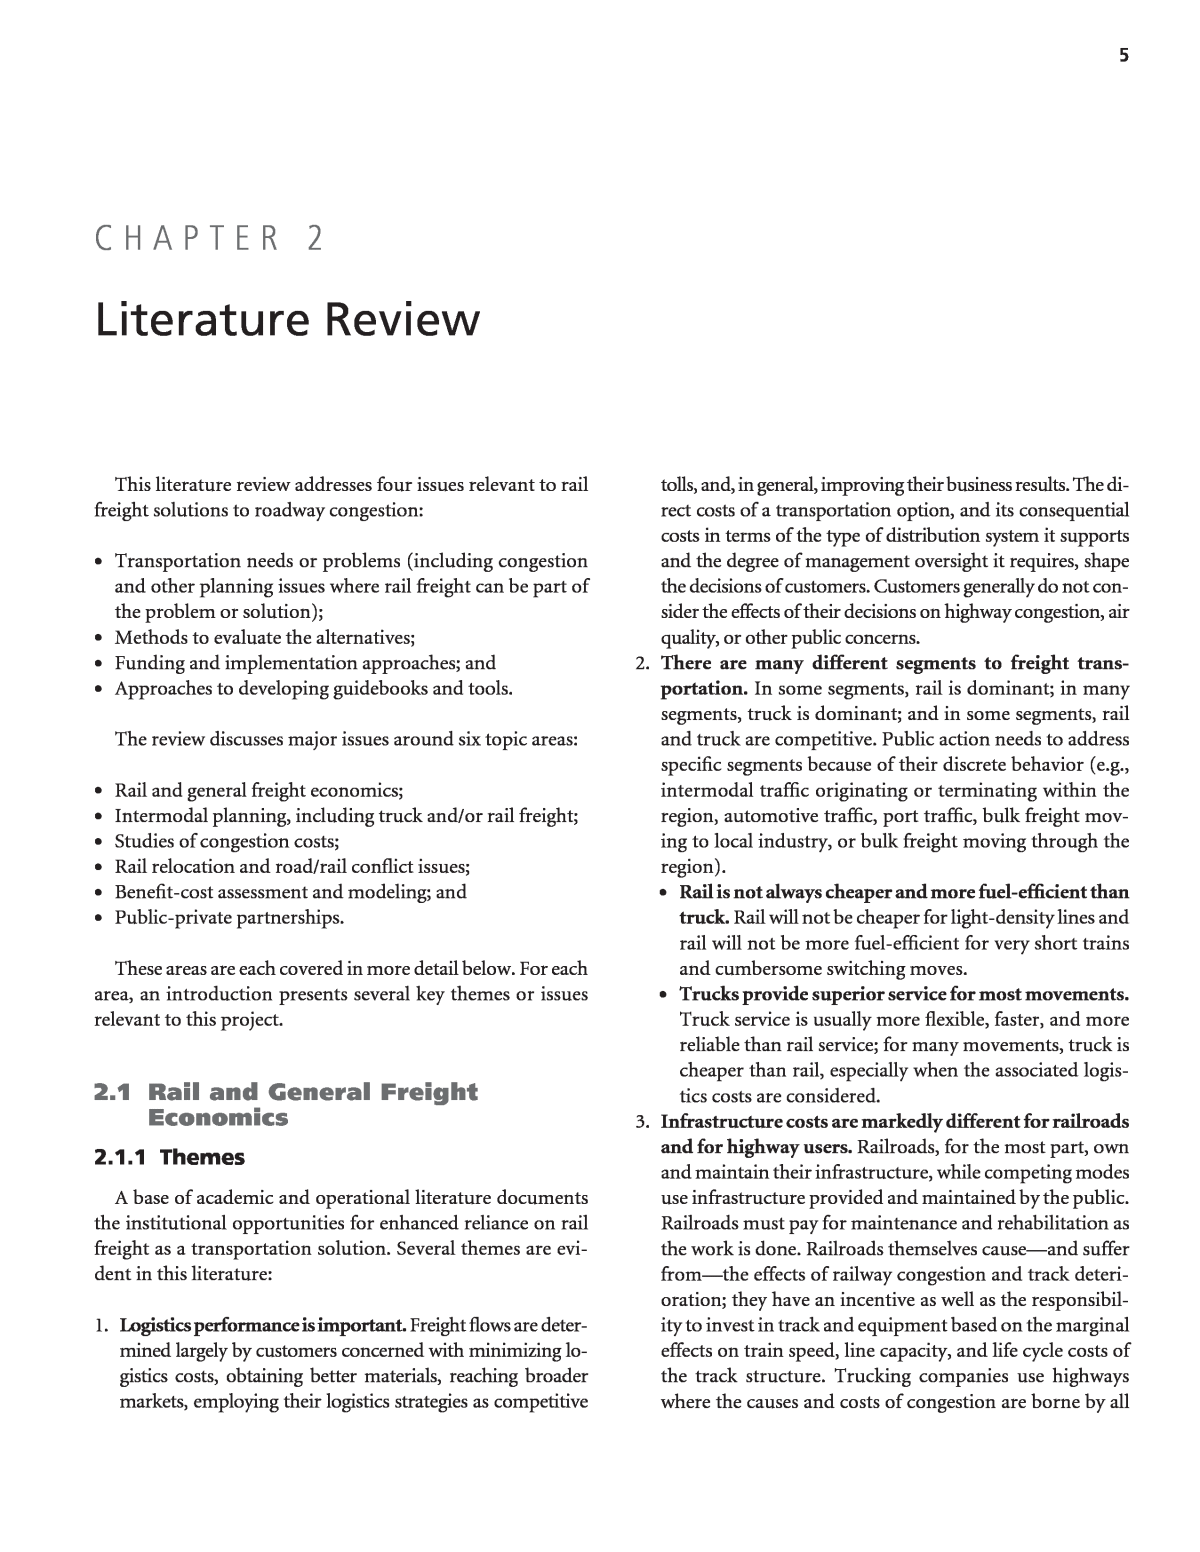 Service delivery literature review